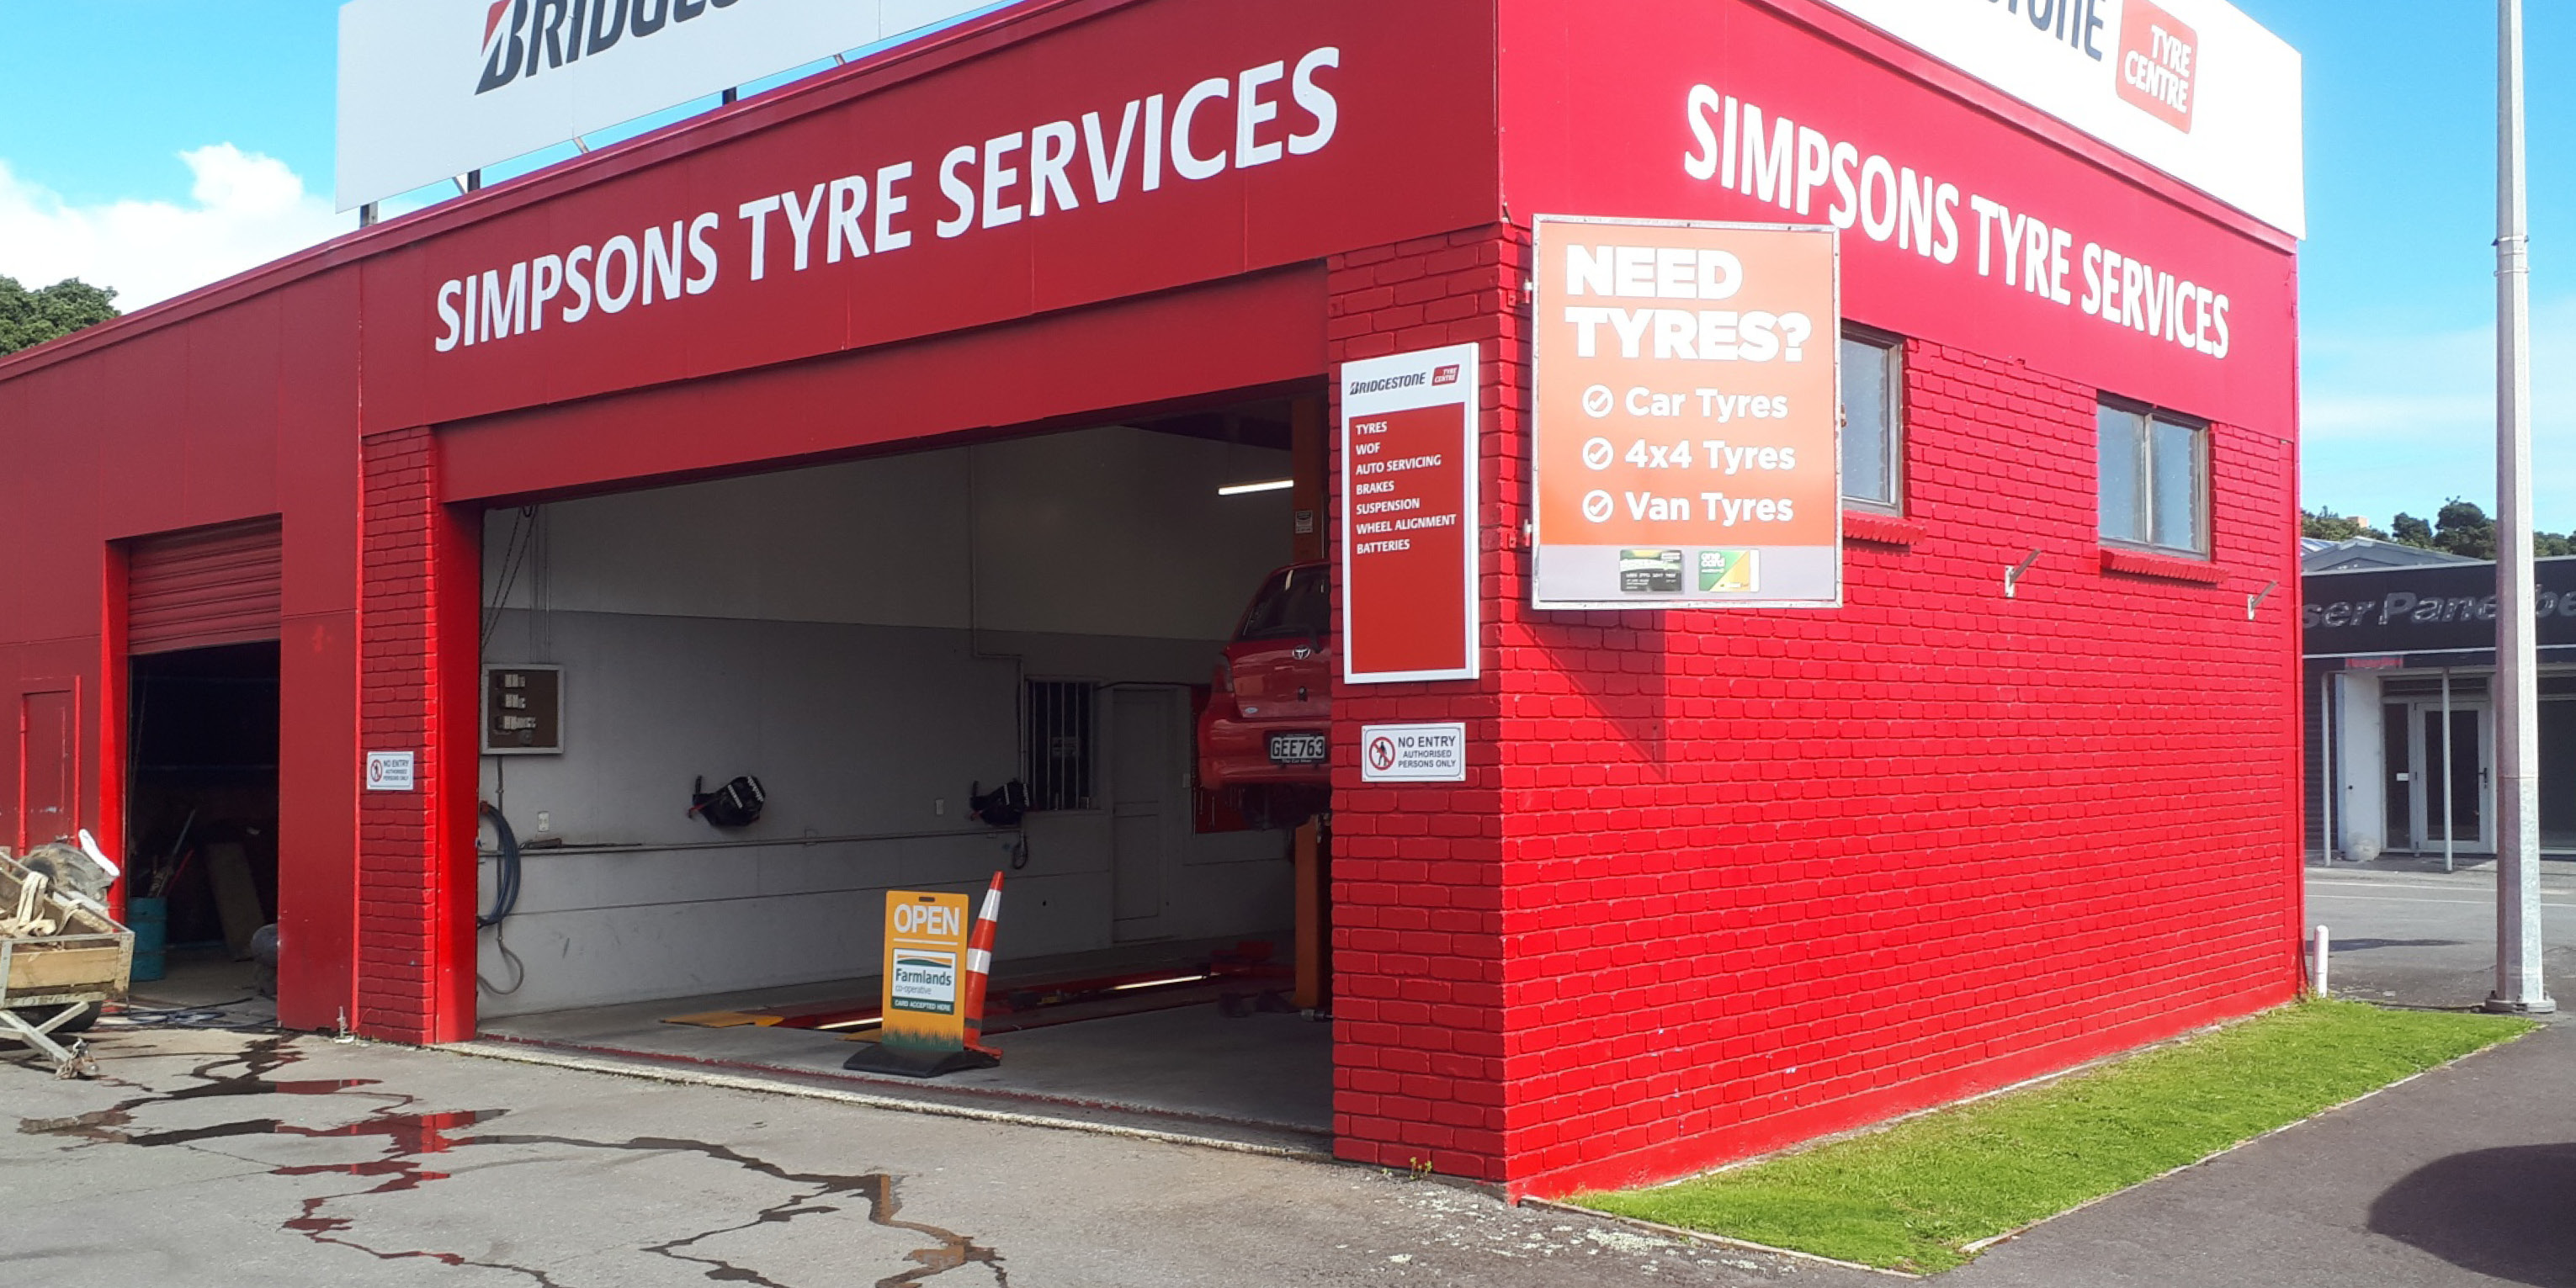 Simpsons Tyre Services